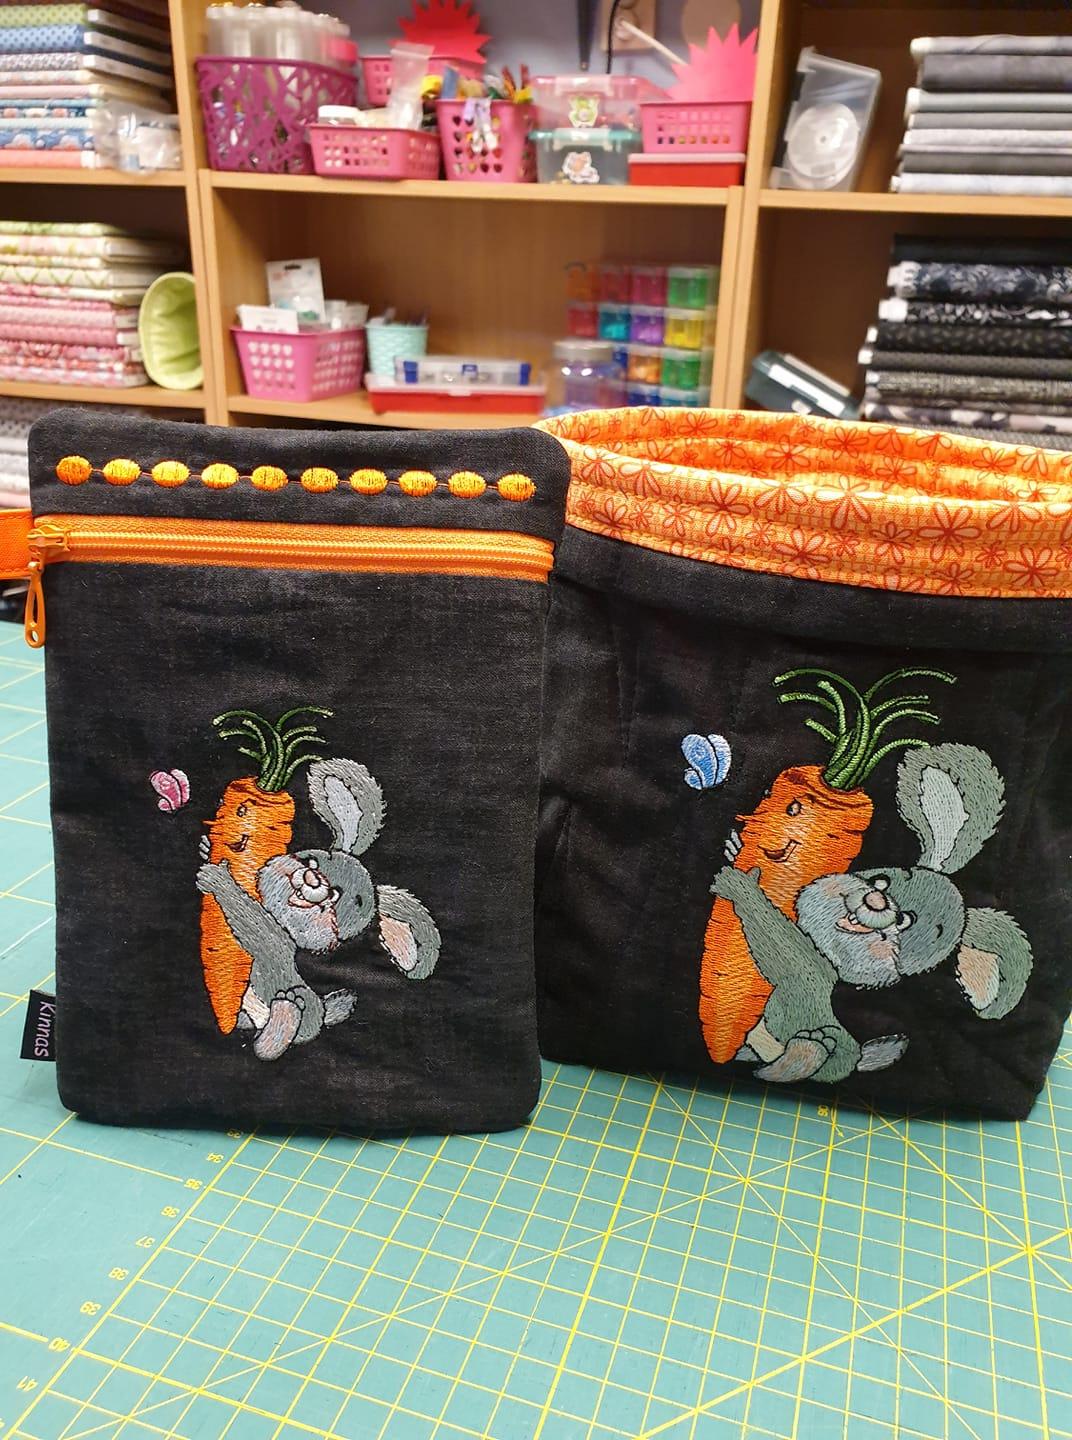 Embroidered set with Bunny and carrot design